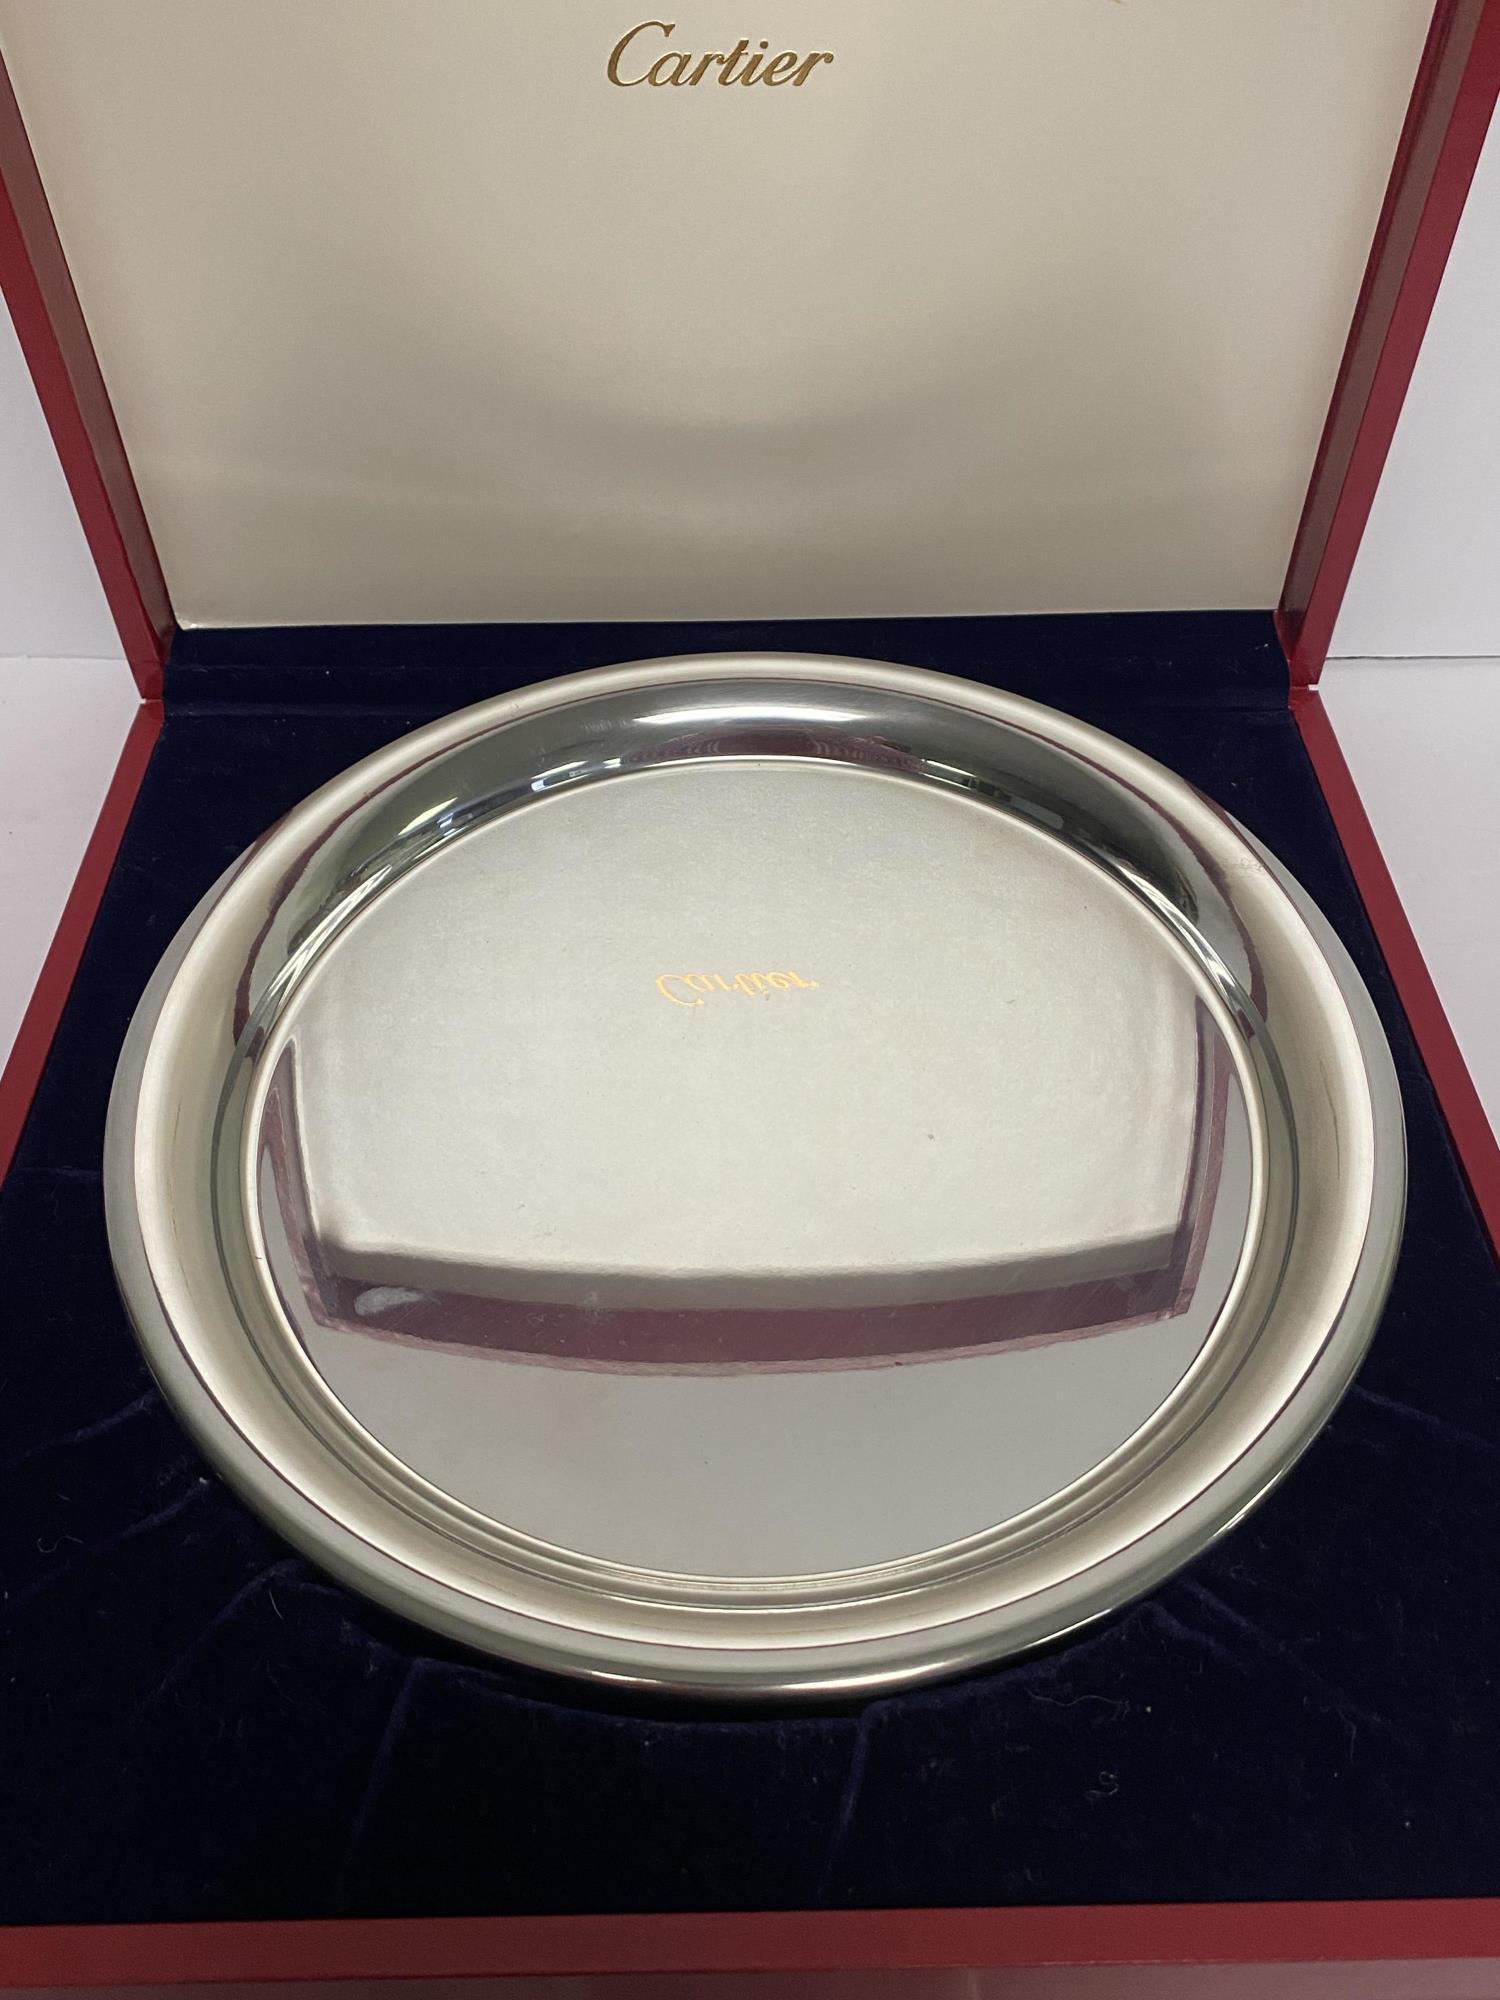 FOR CARTIER - POLISHED PEWTER PLATE